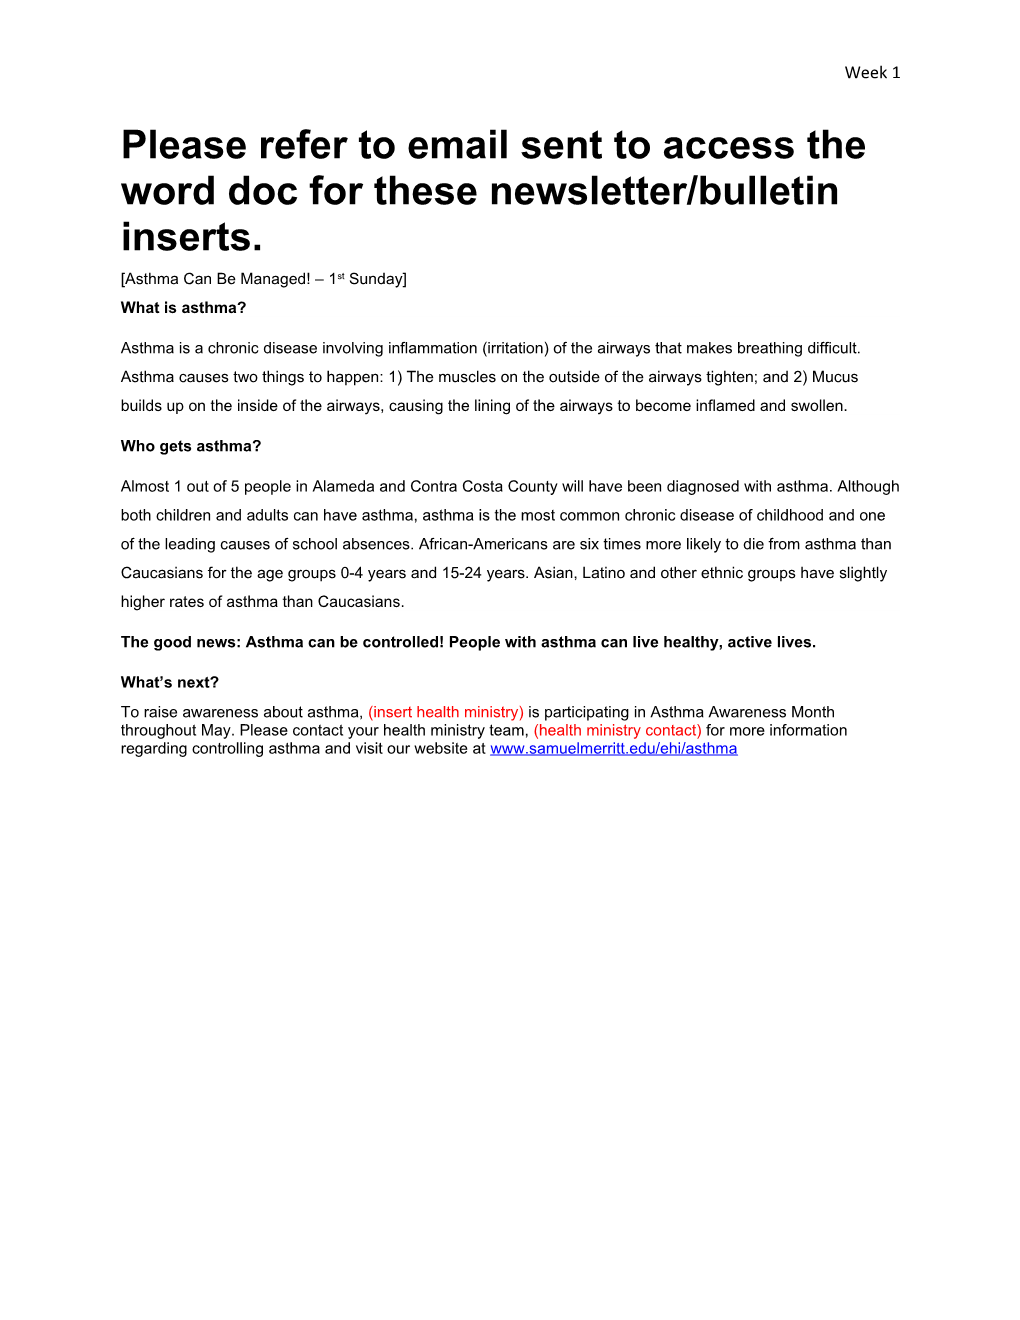 Please Refer to Email Sent to Access the Word Doc for These Newsletter/Bulletin Inserts